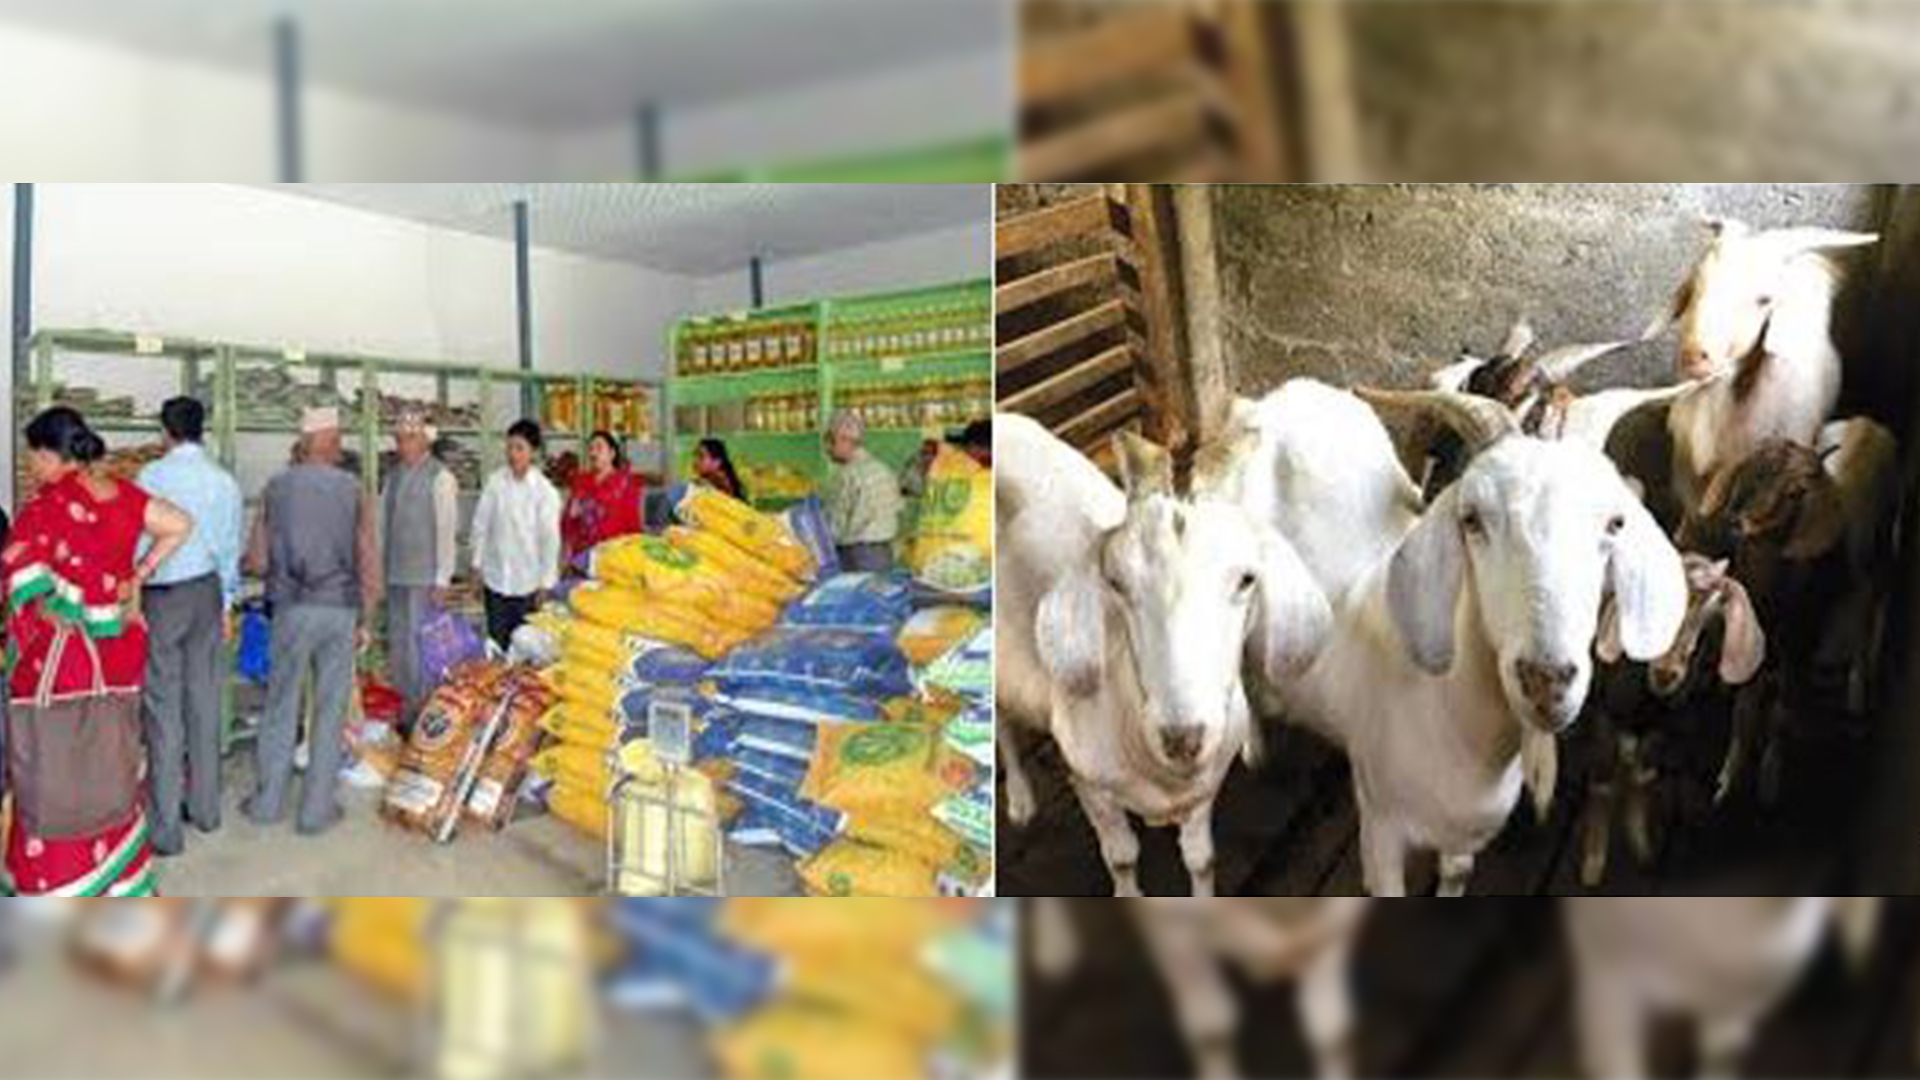 Festival ‘Discounted Shops’ to start operation from today- Goats and Sheeps coming from Dang, Makwanpur and Mustang